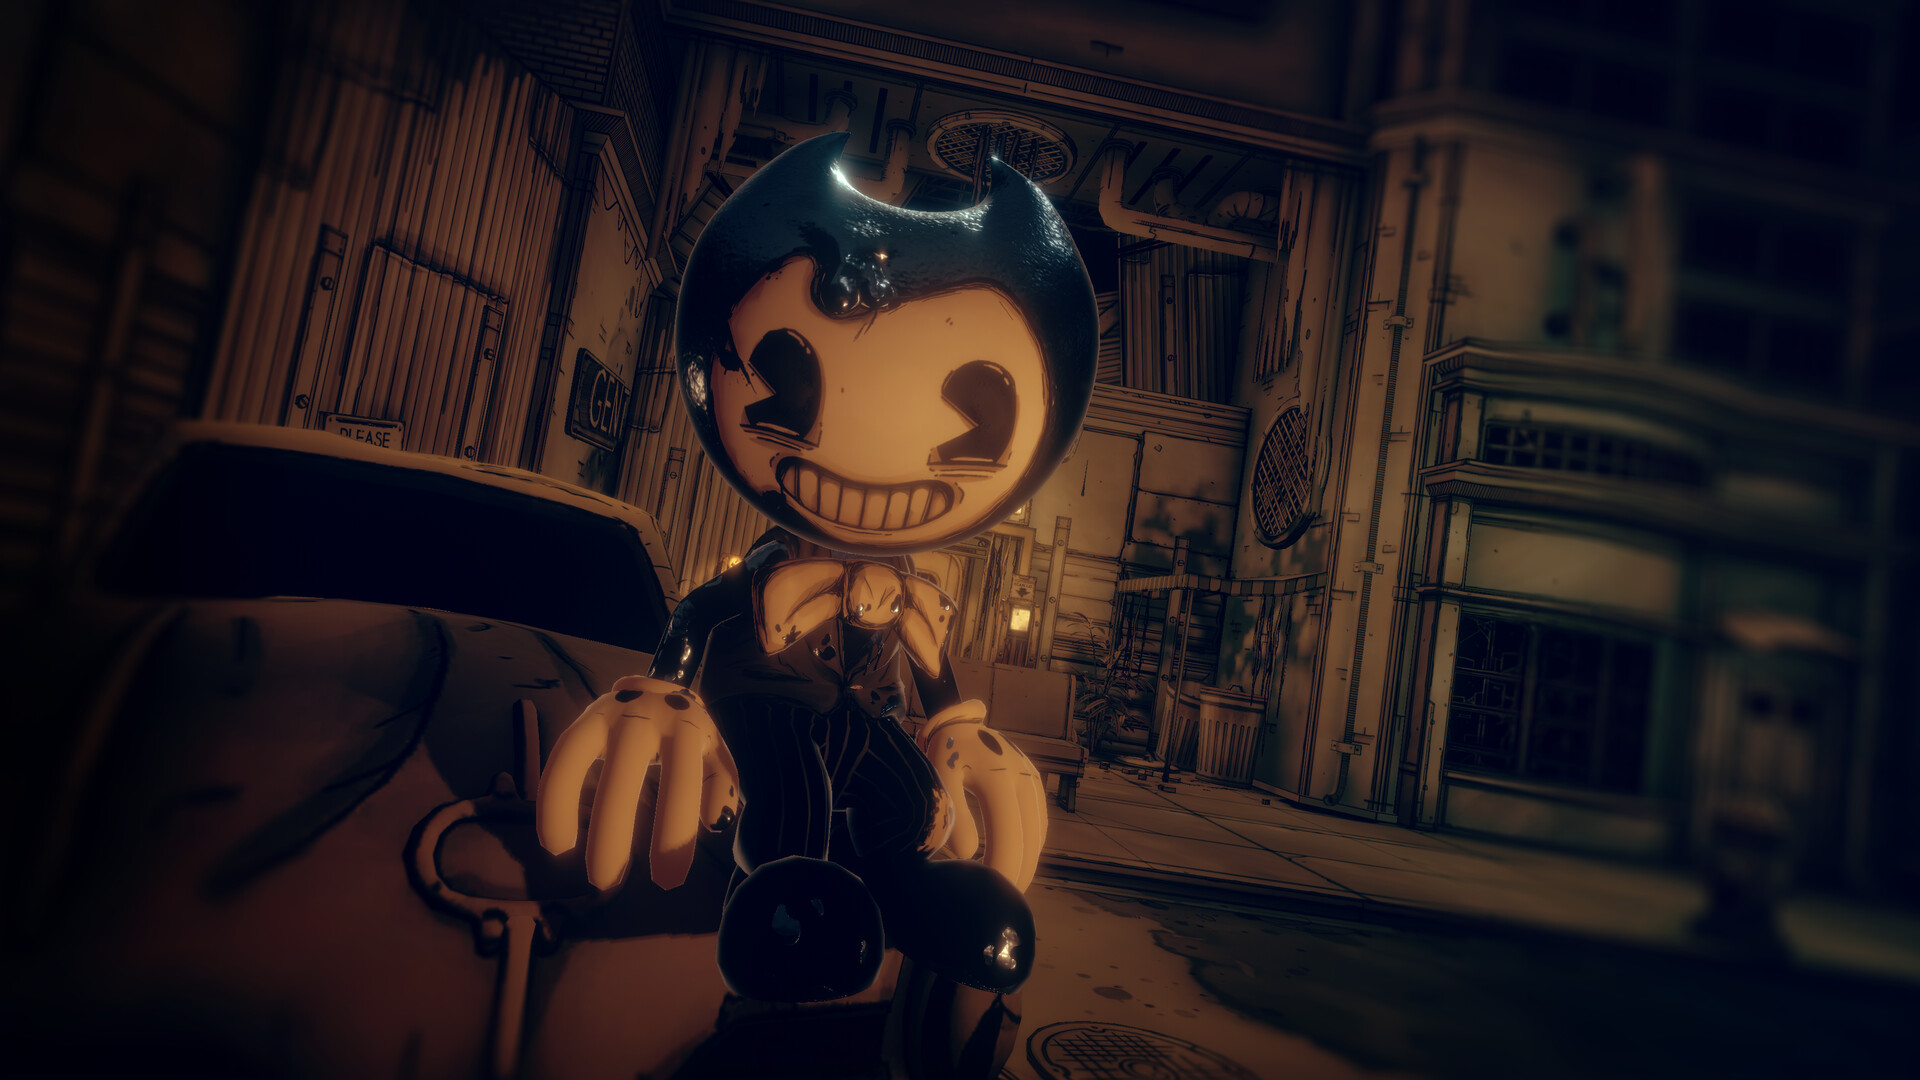 five nights with anime bendy(demo) APK (Android App) - Free Download